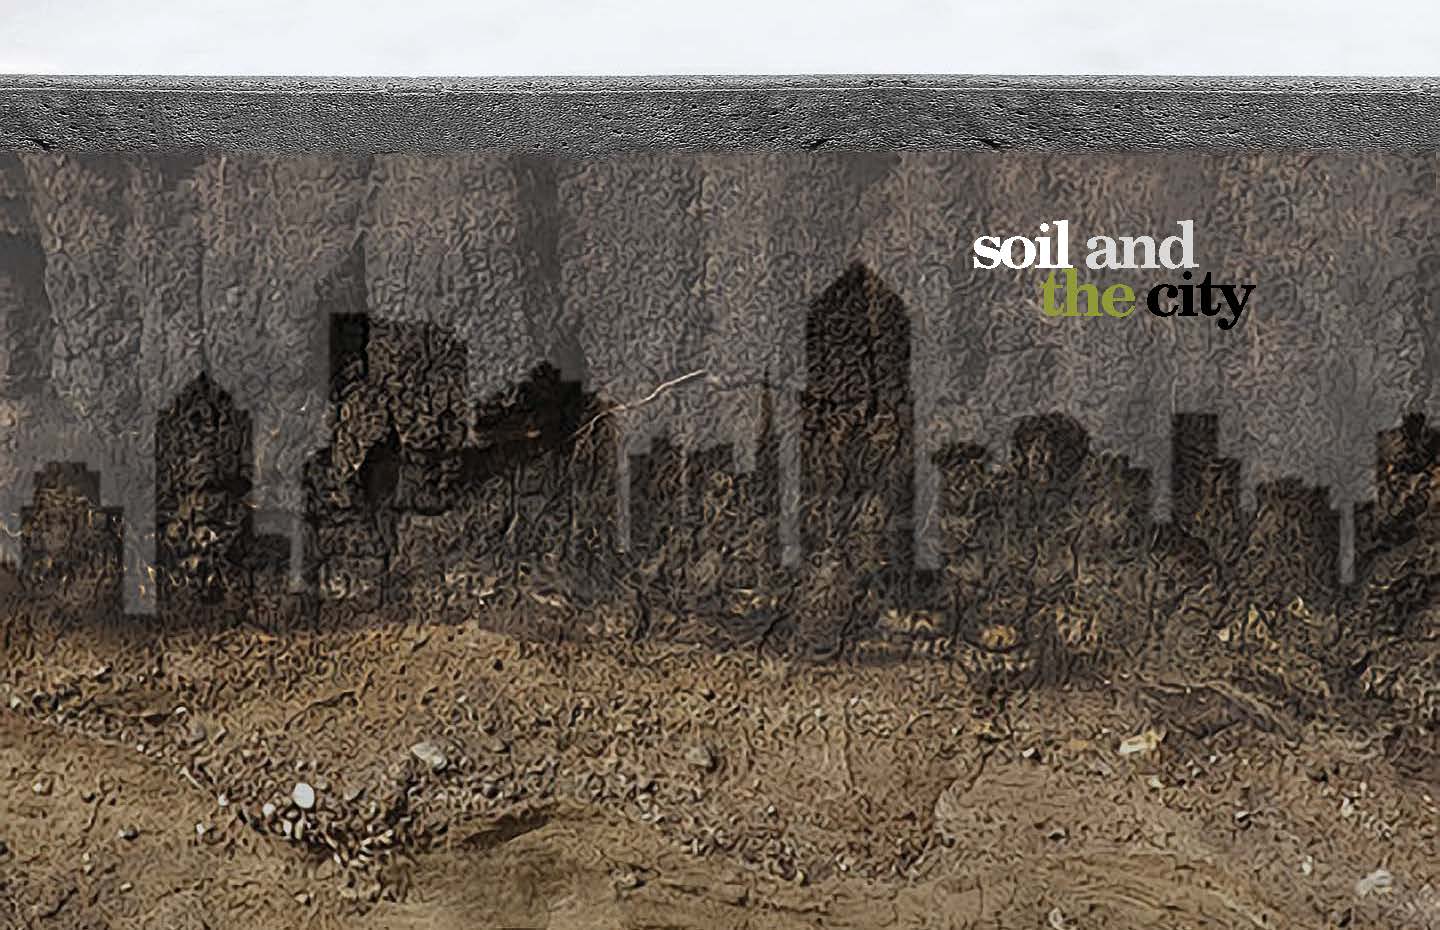 soil in the city title image